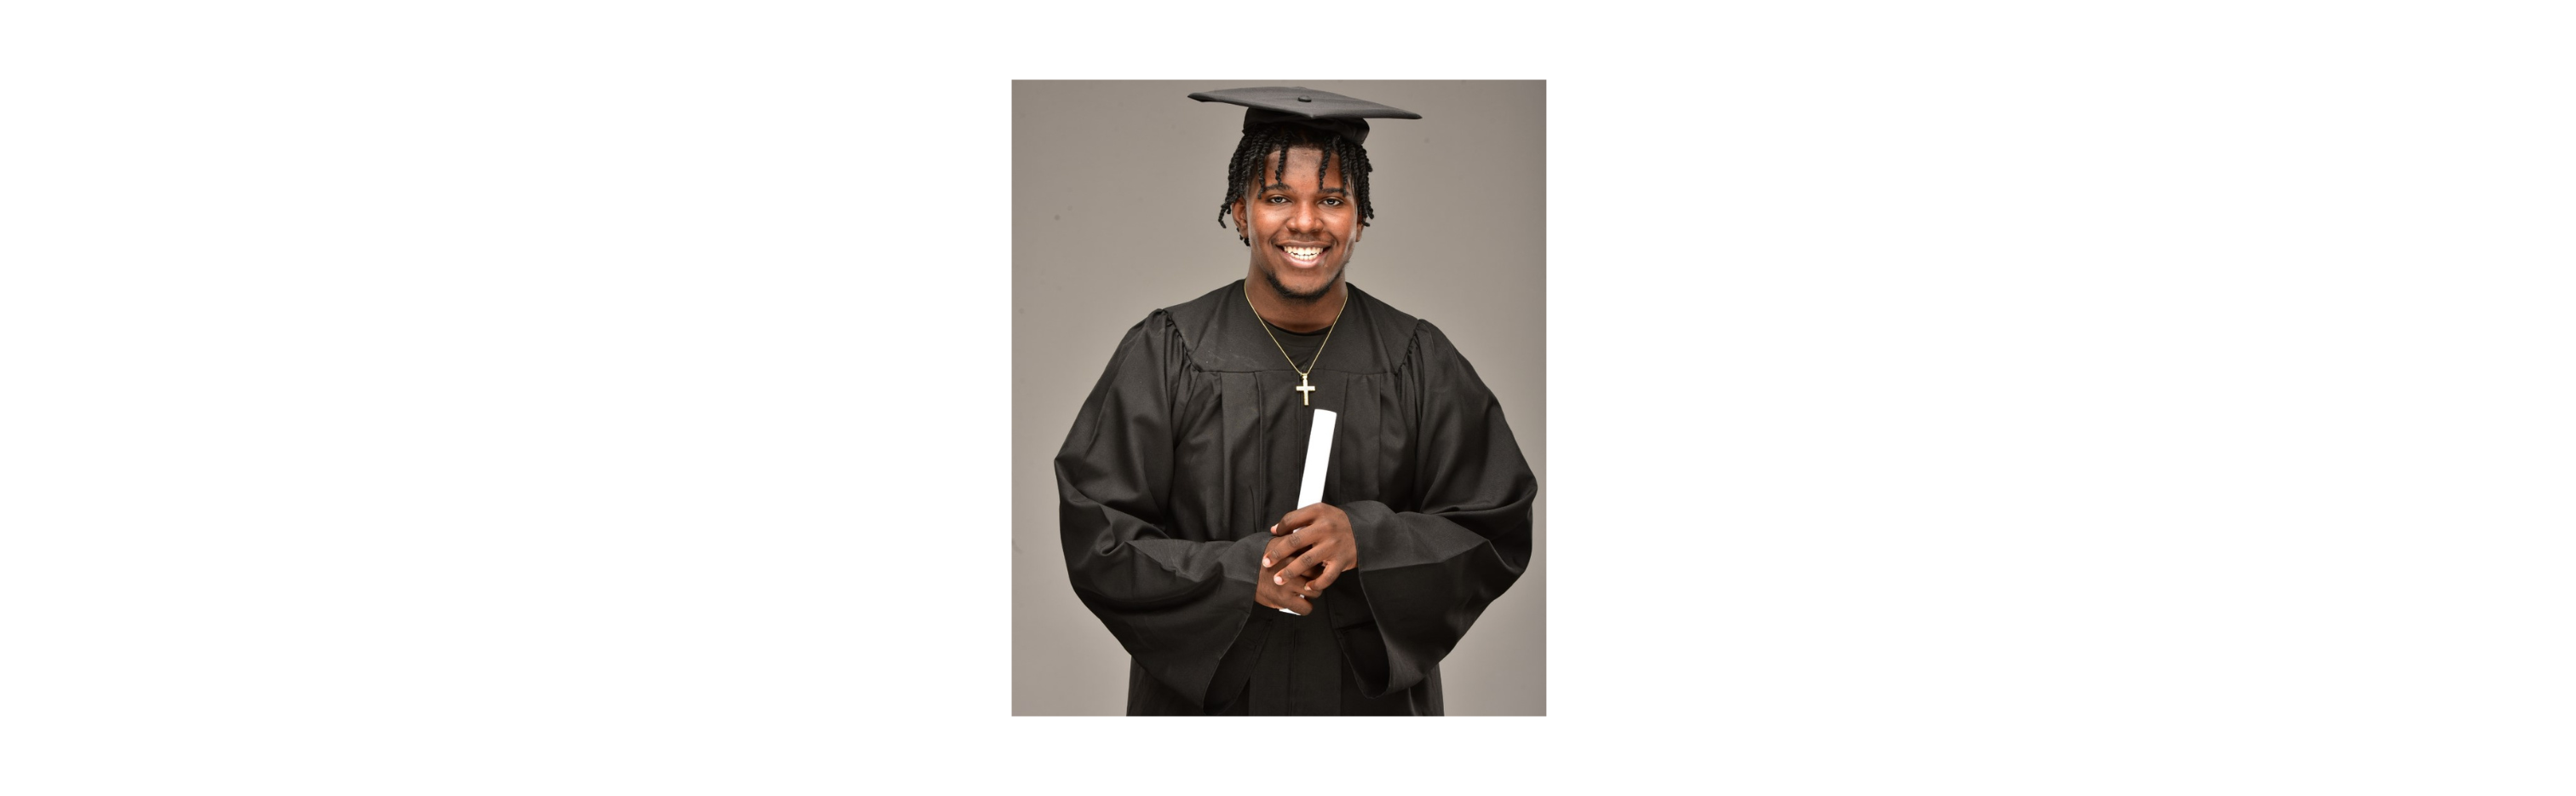 Student wearing his graduation cap and gown. His cap and gown are black.